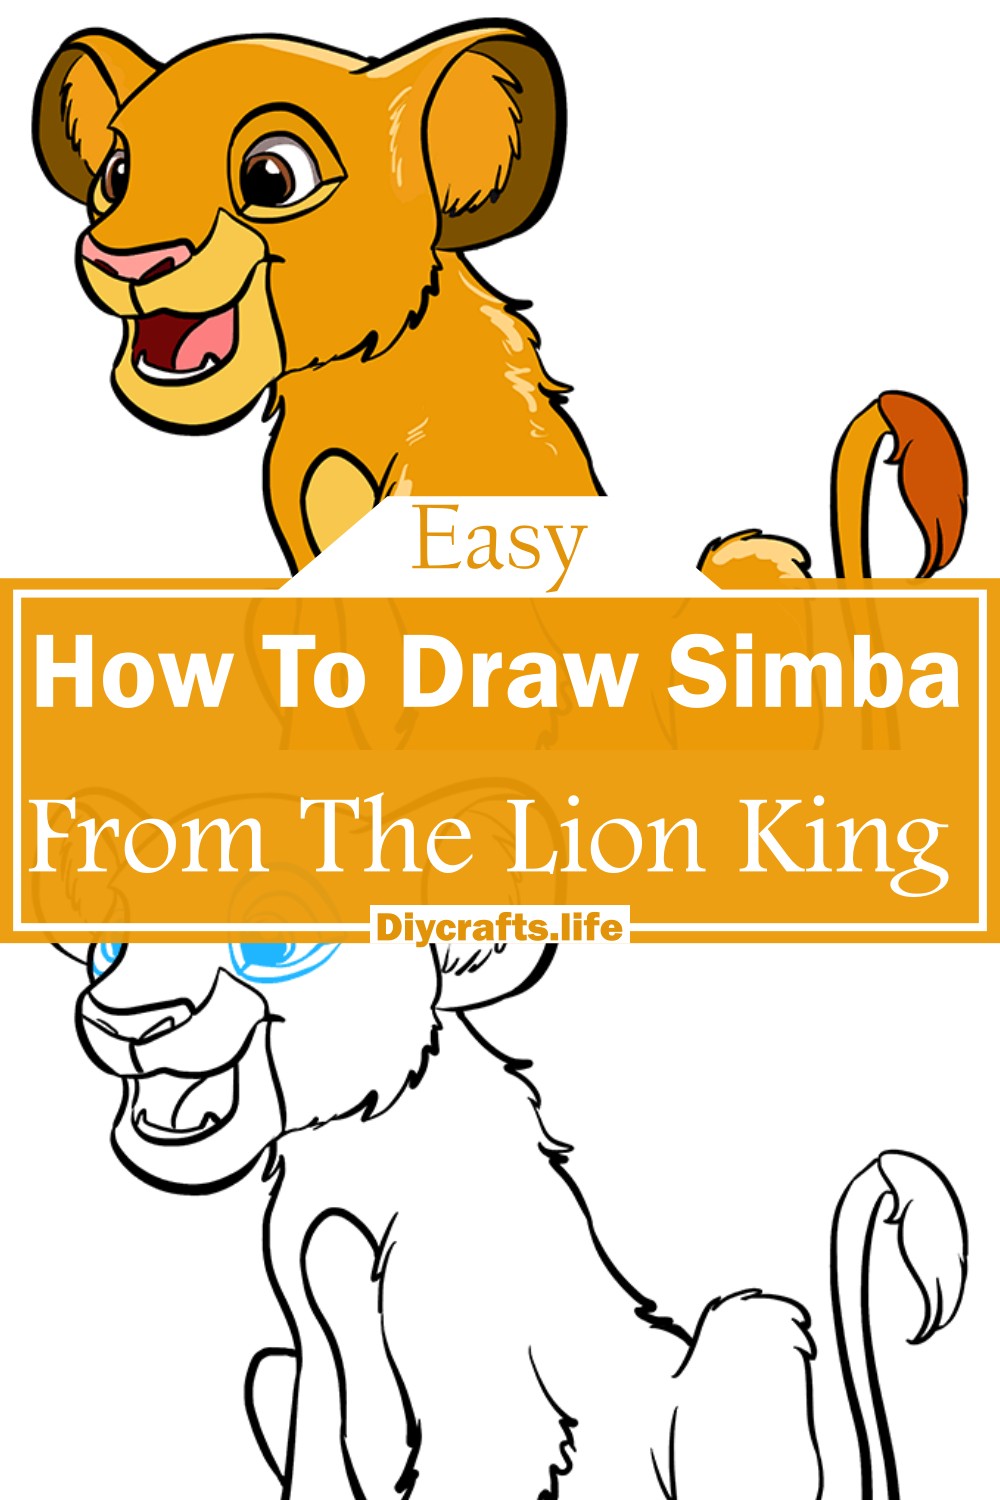 How To Draw Simba From The Lion King